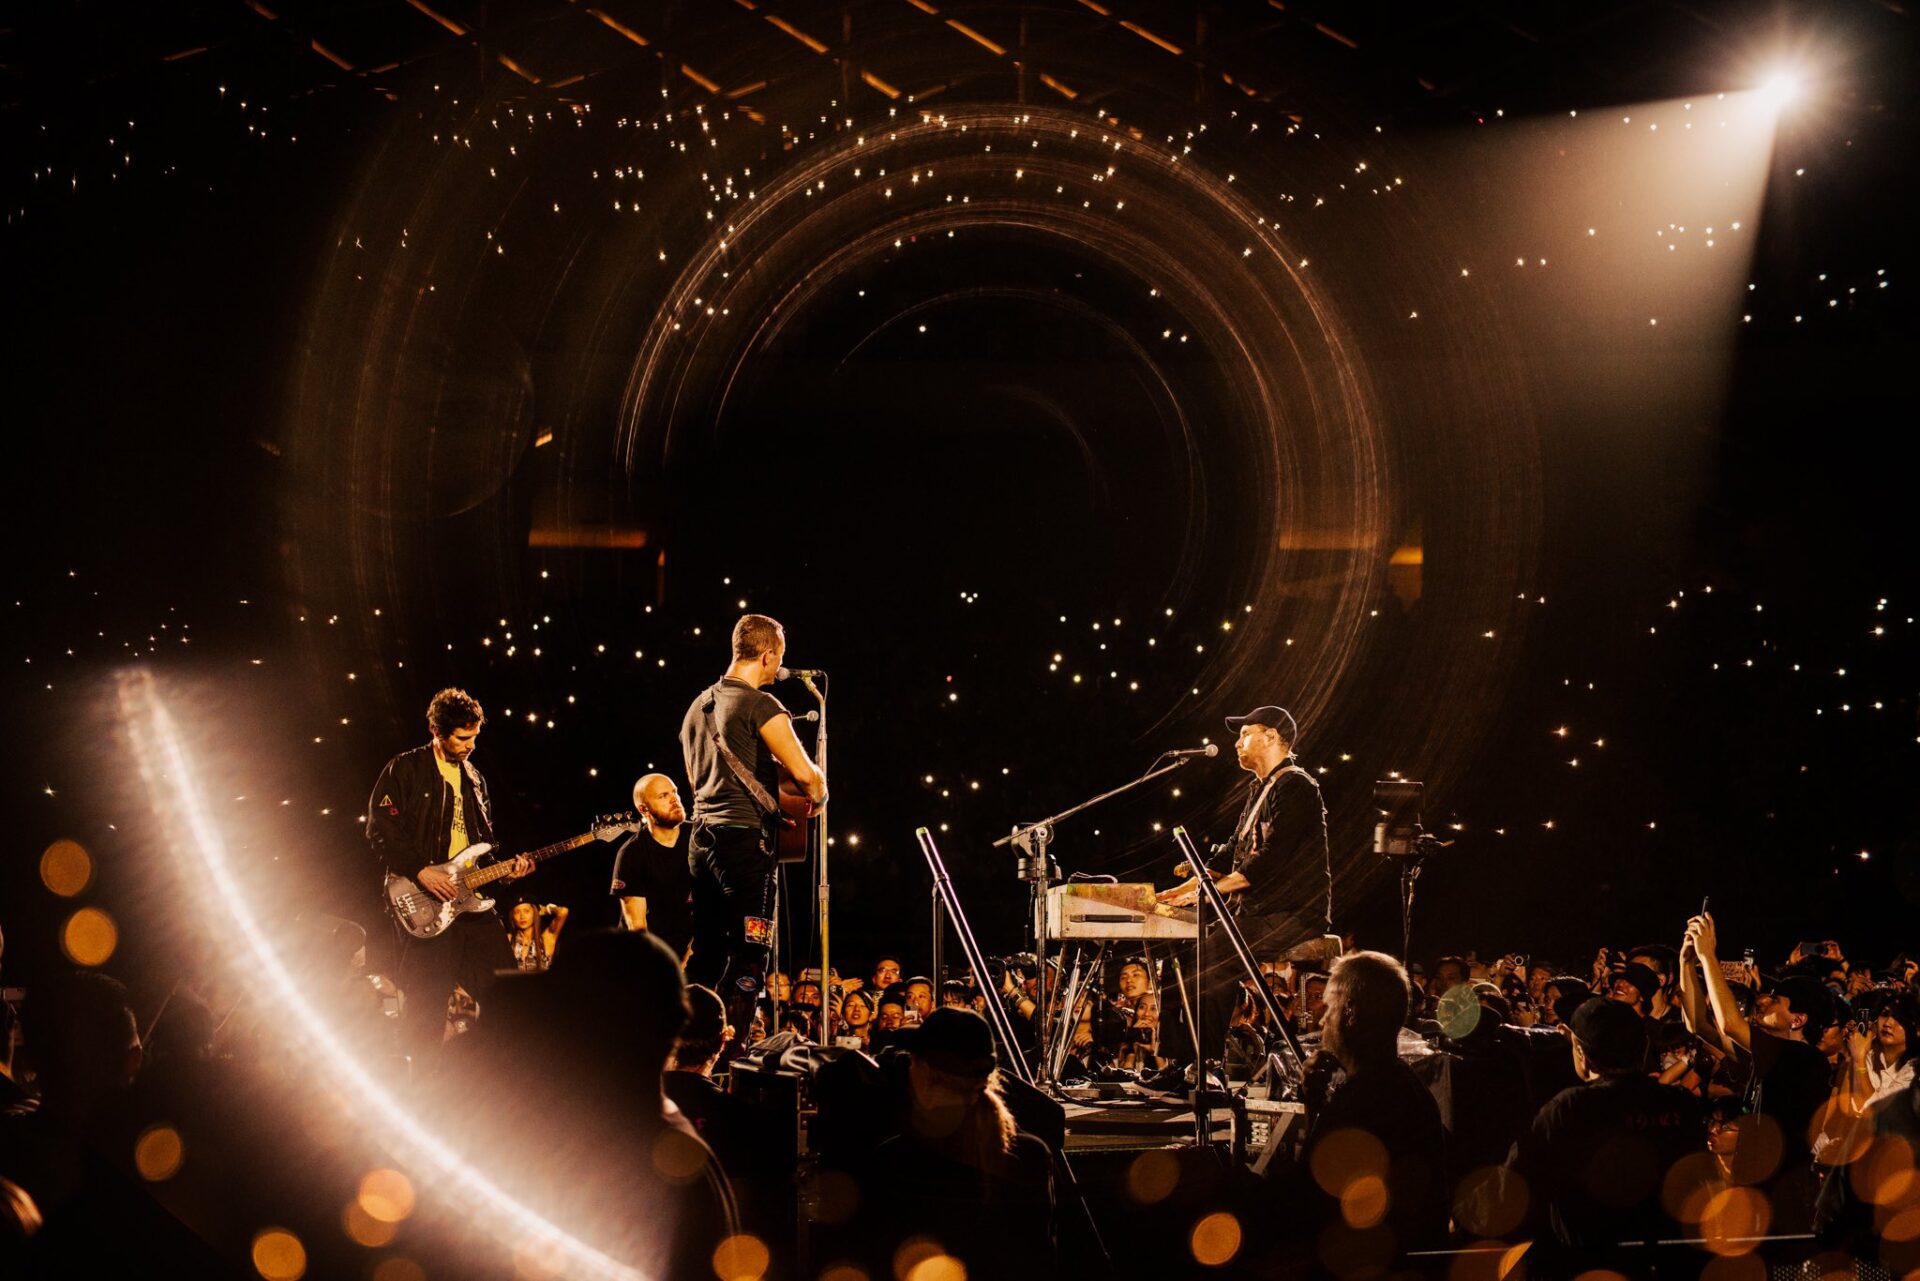 coldplay during concert